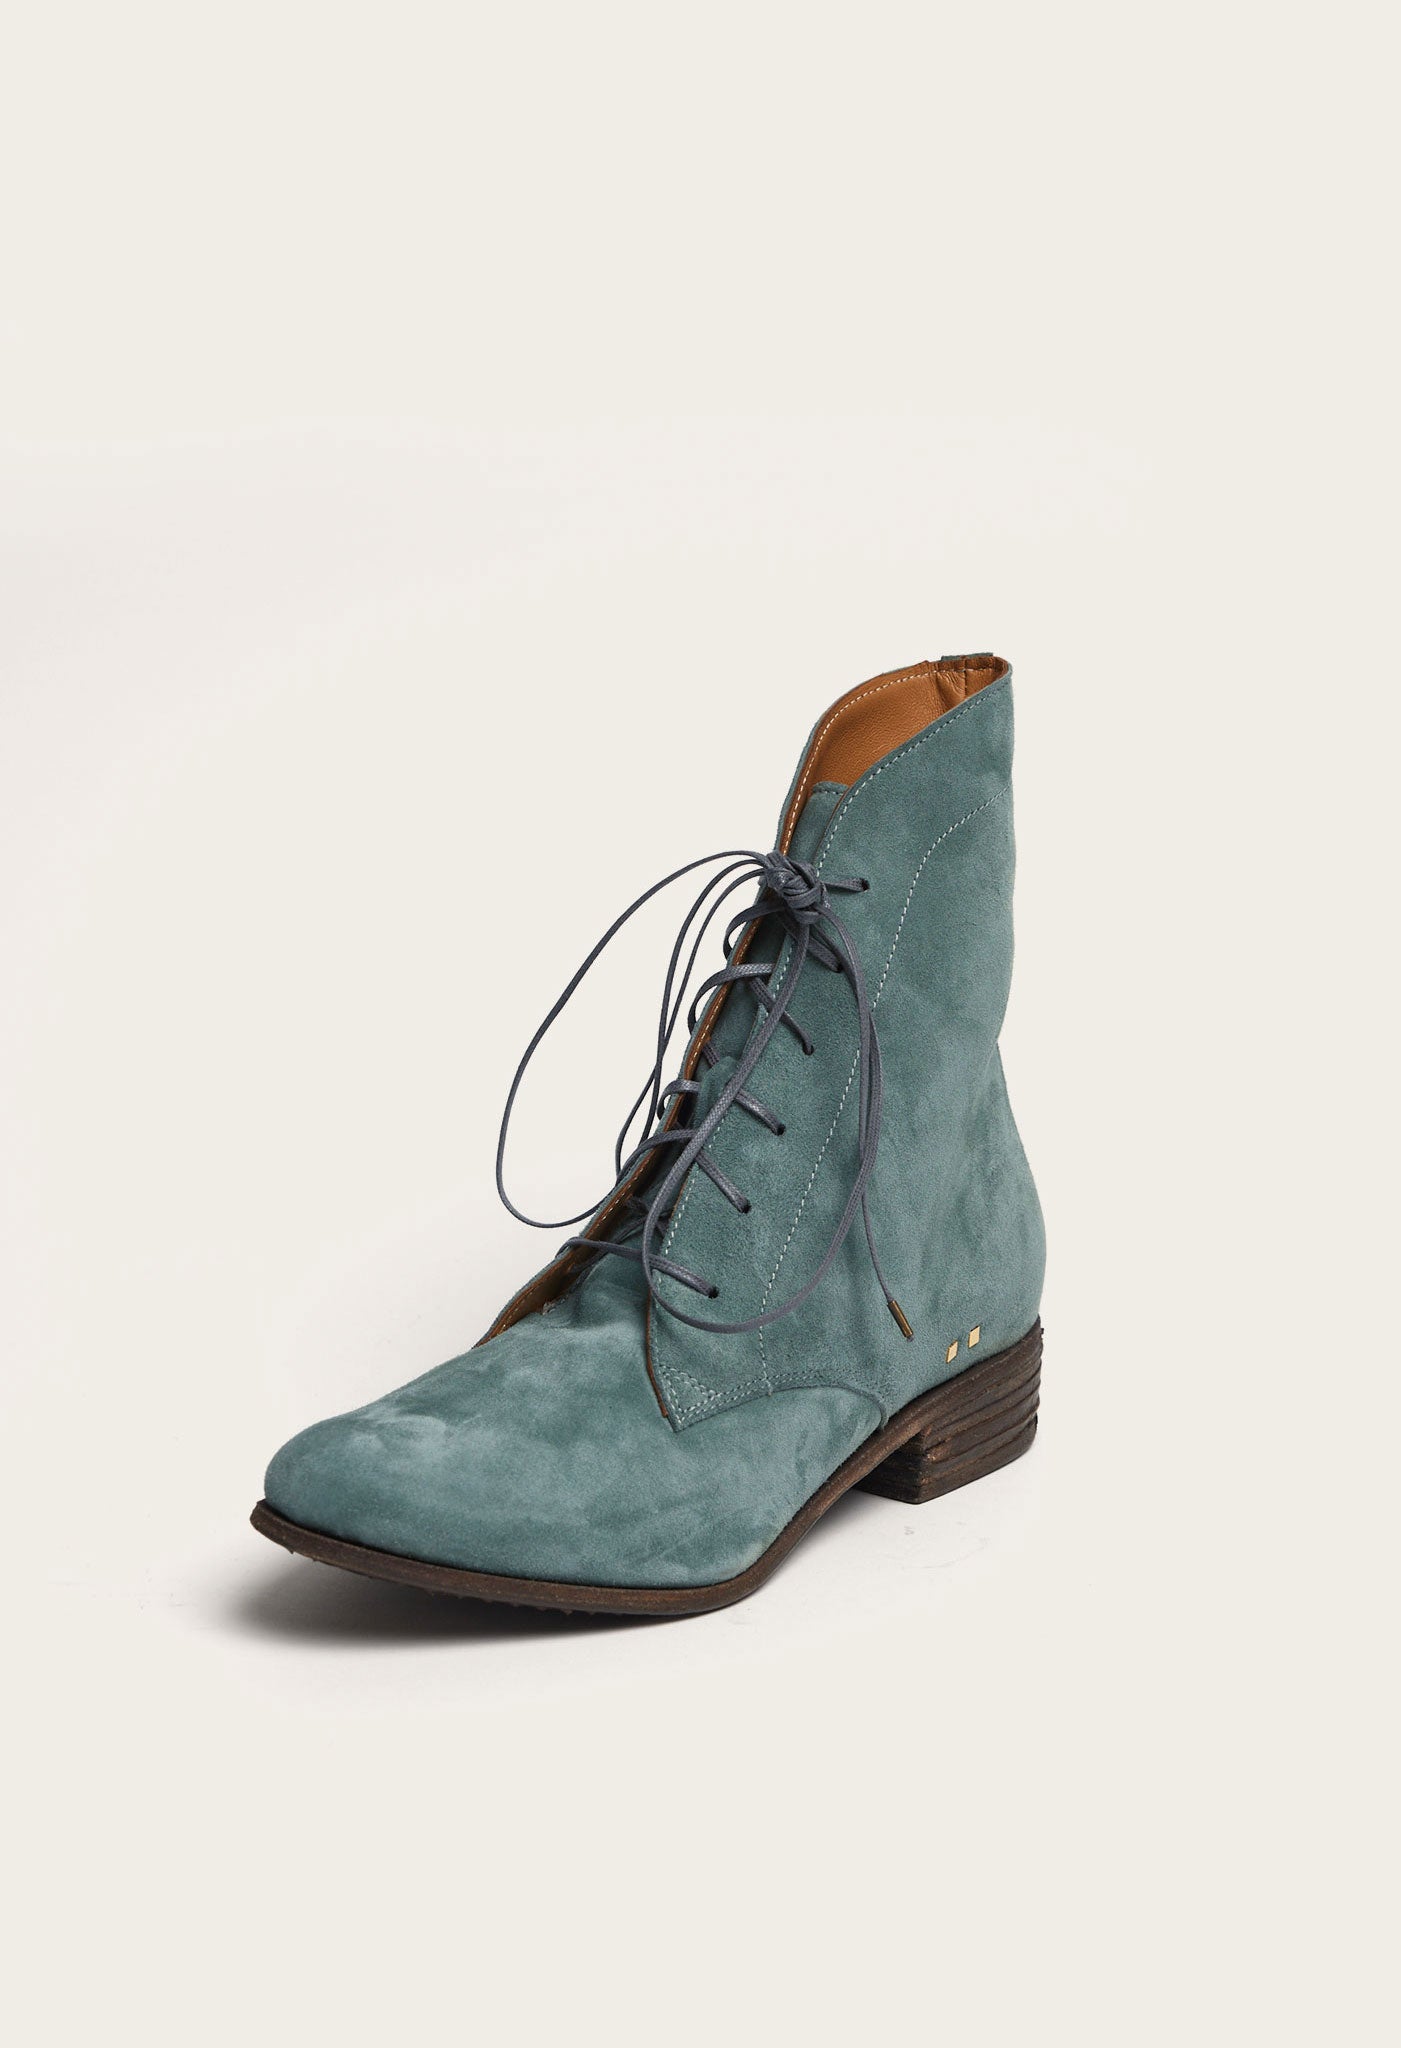 LNO The Women's Mansfield: Blue Fir Suede Size W38 (Worn for Photography/Stylist Loan) SOLD